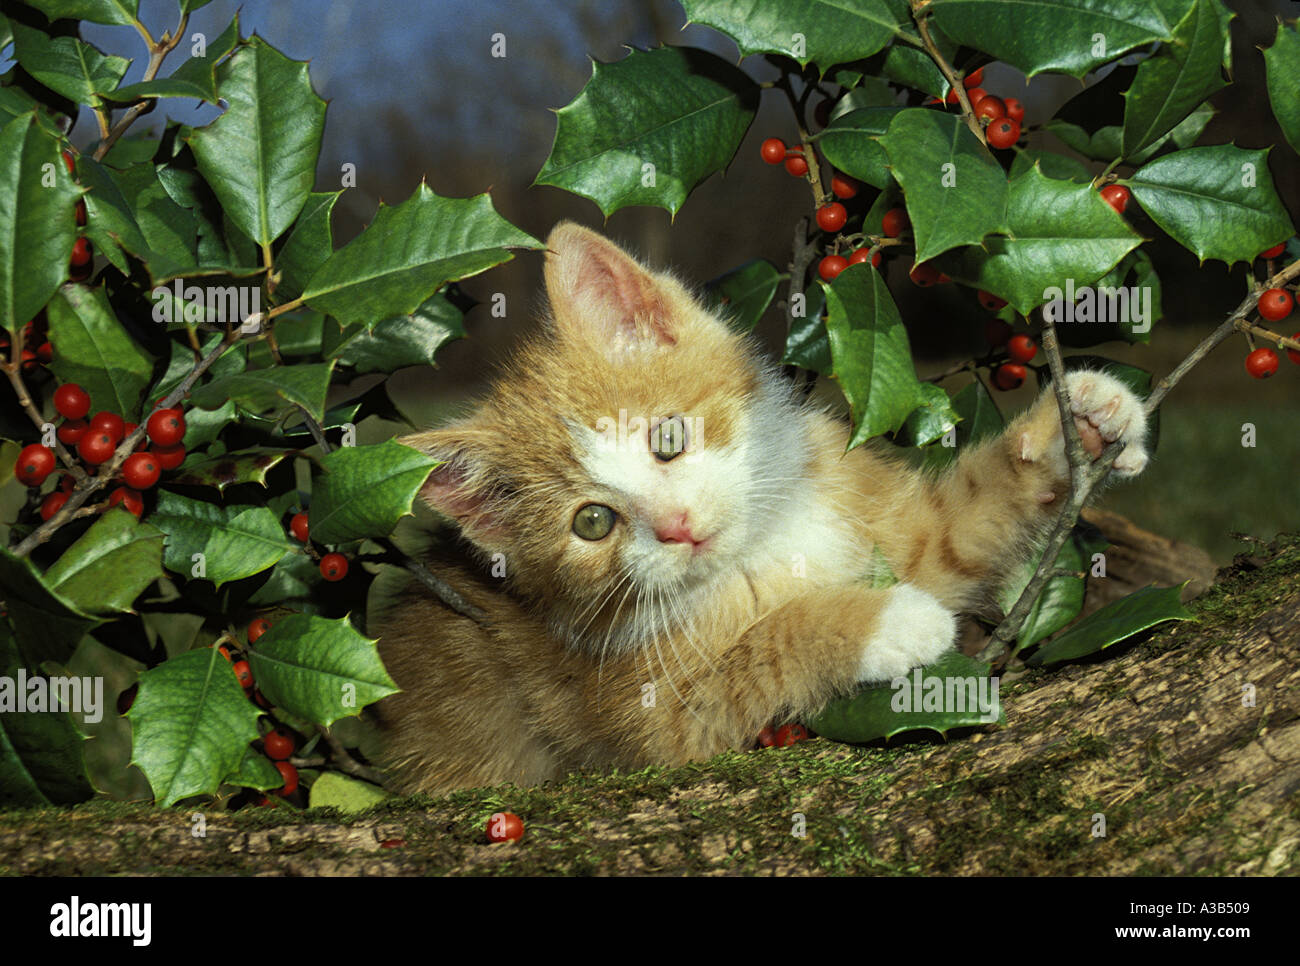 Yellow and white tabby blue-eyed kitten playing on log in garden beside holly tree with red berries, Midwest USA Stock Photo